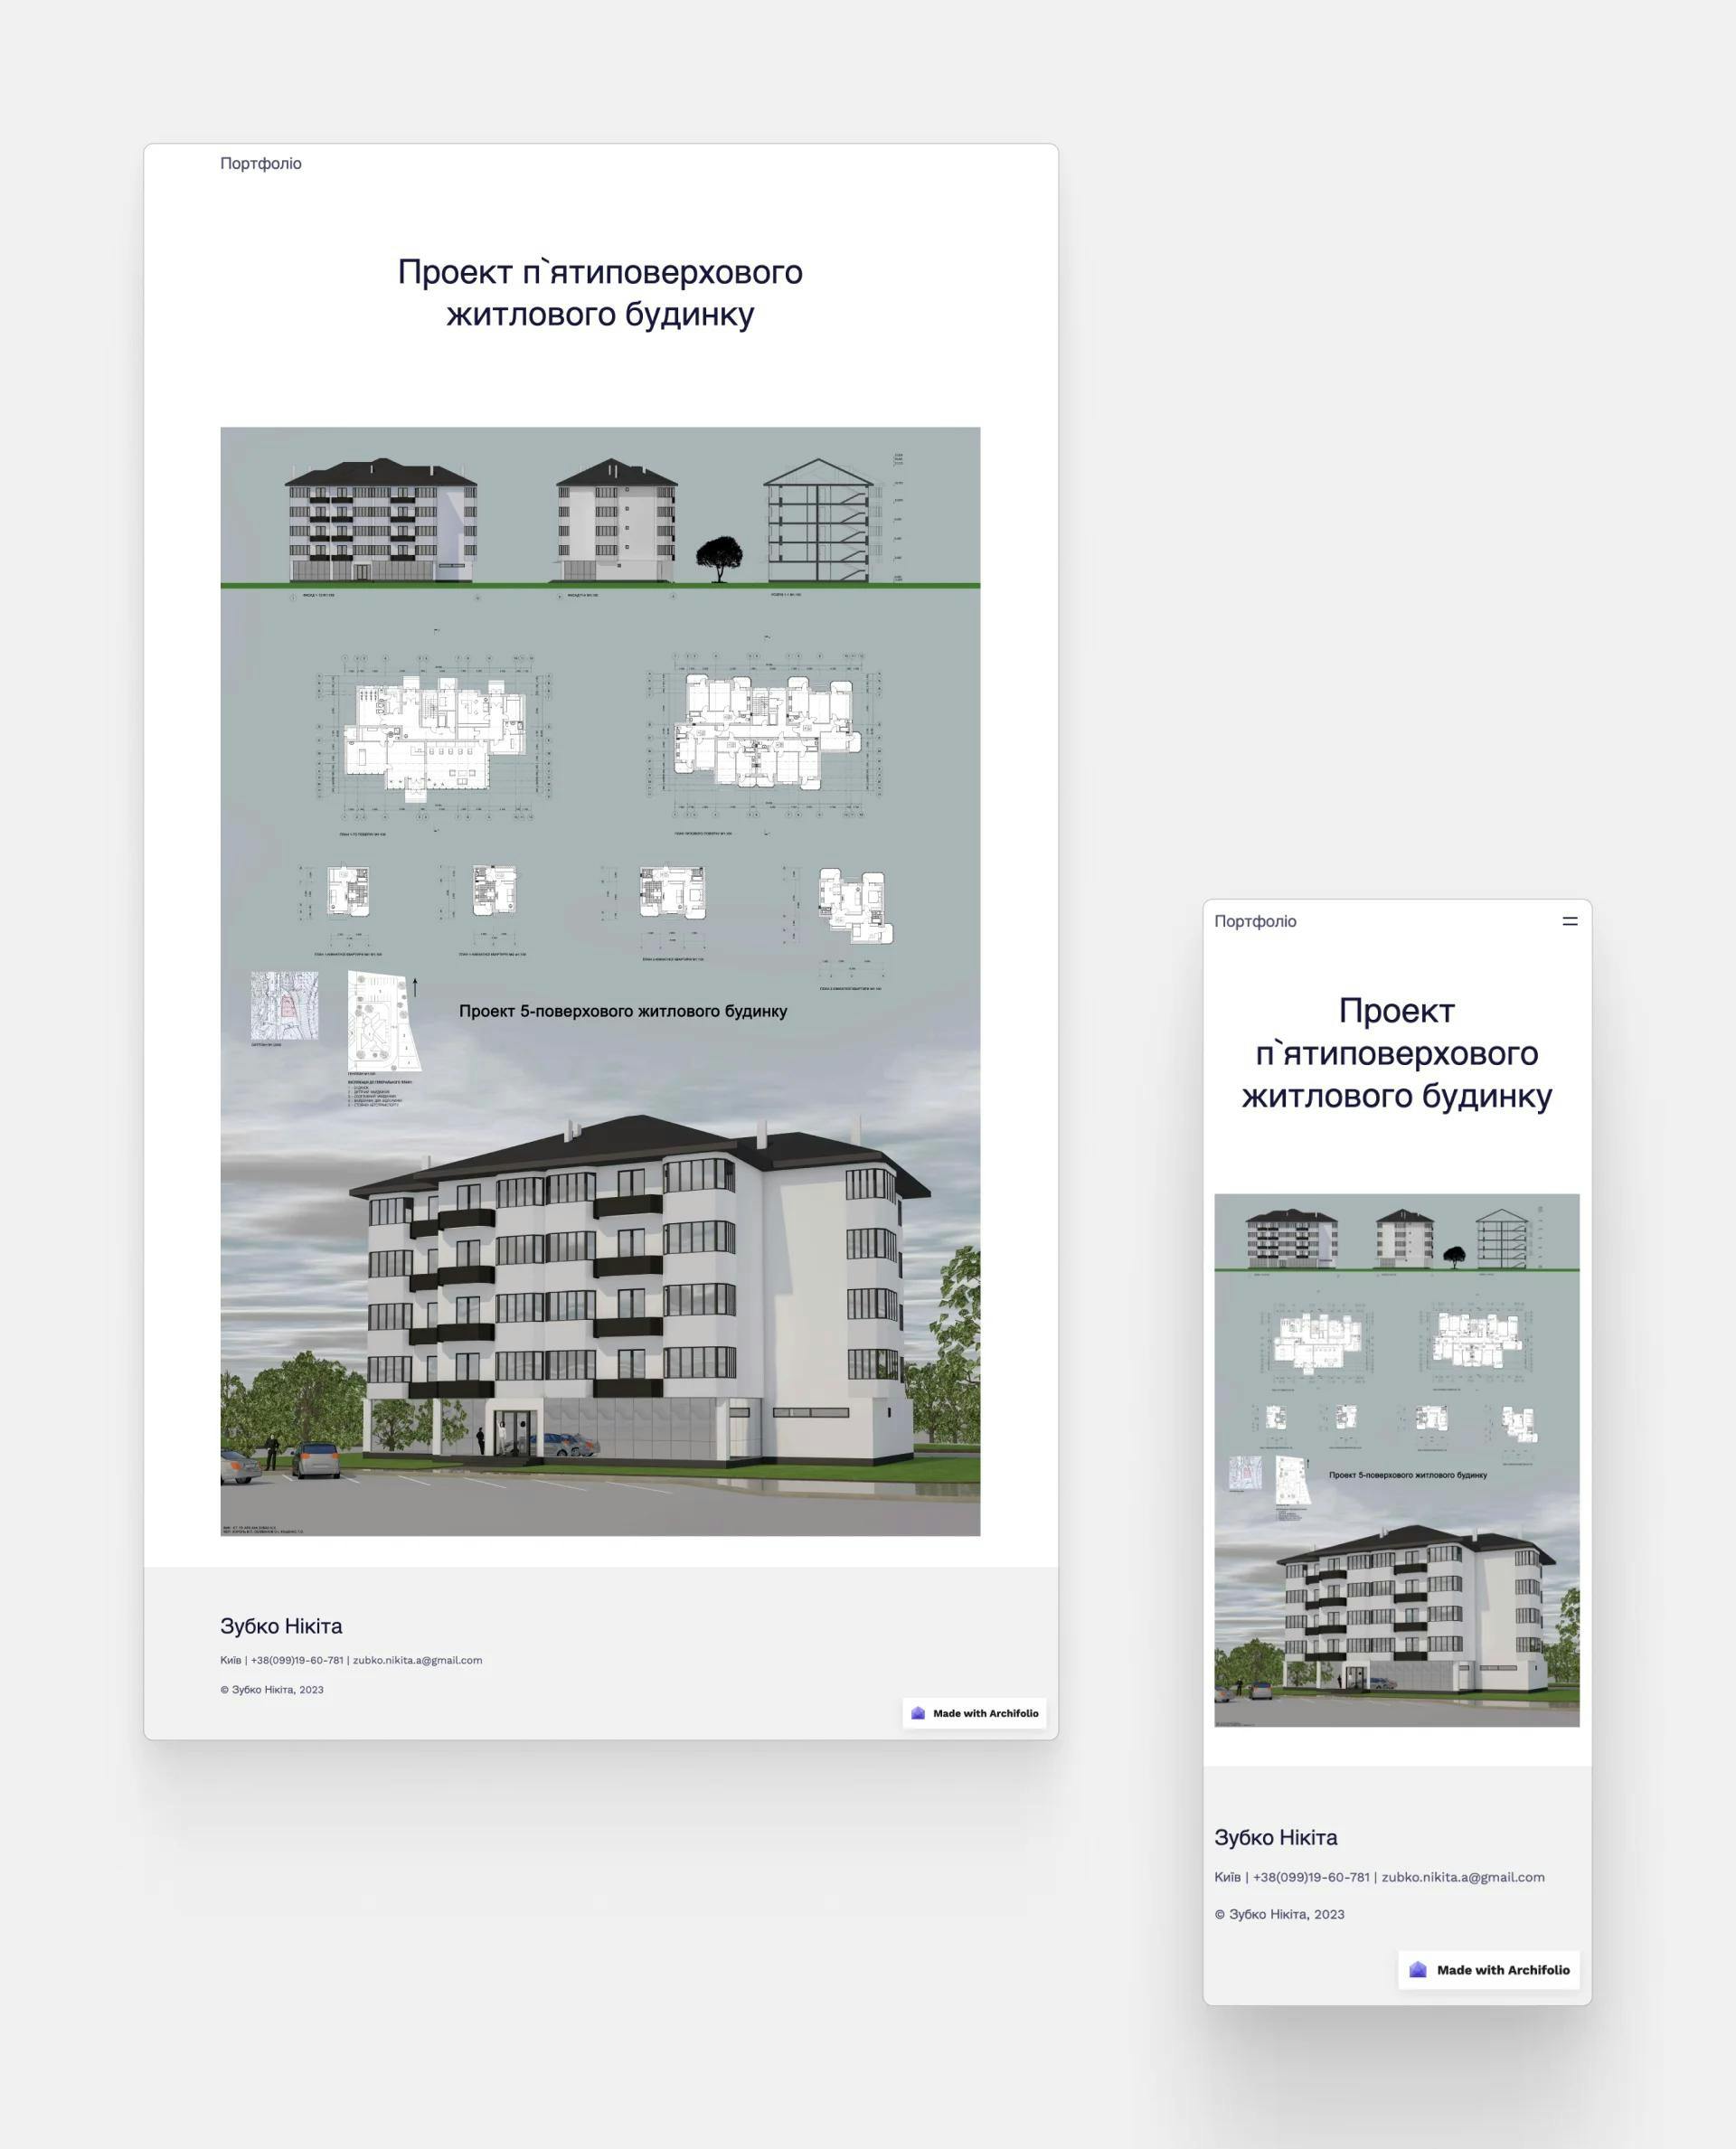  Screenshot of the desktop and mobile view of Nikita Zubko's architectural posters